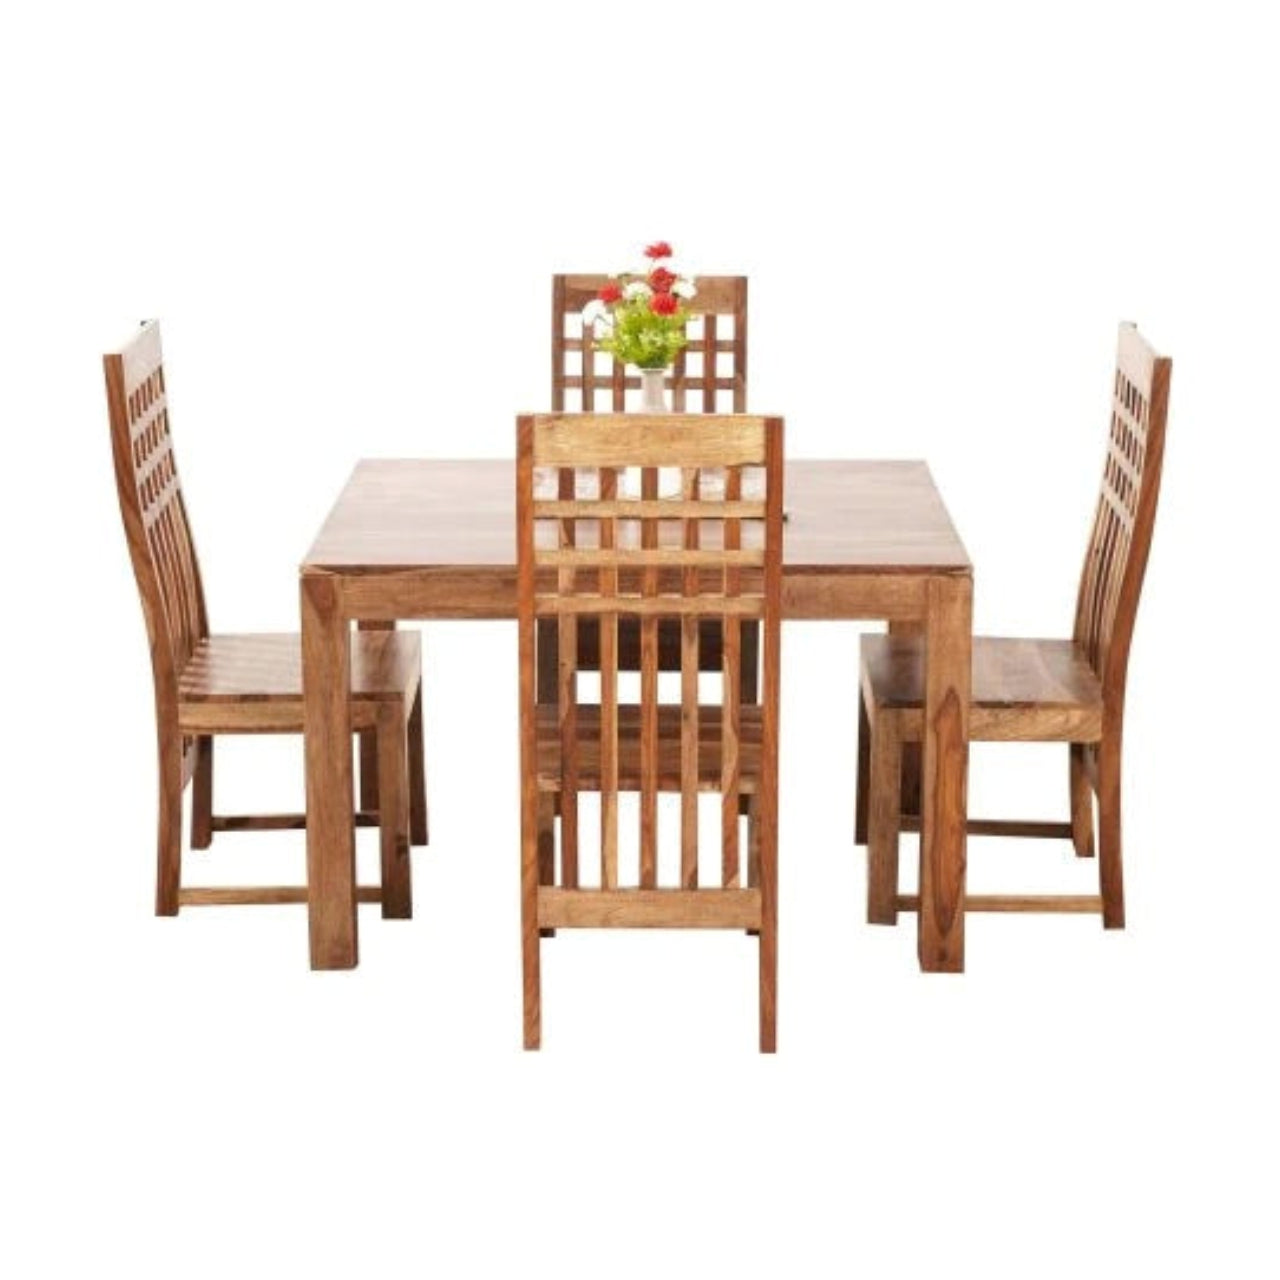 Sheesham Furniture - Solid Wood Four Seat Dining Set in Natural finish